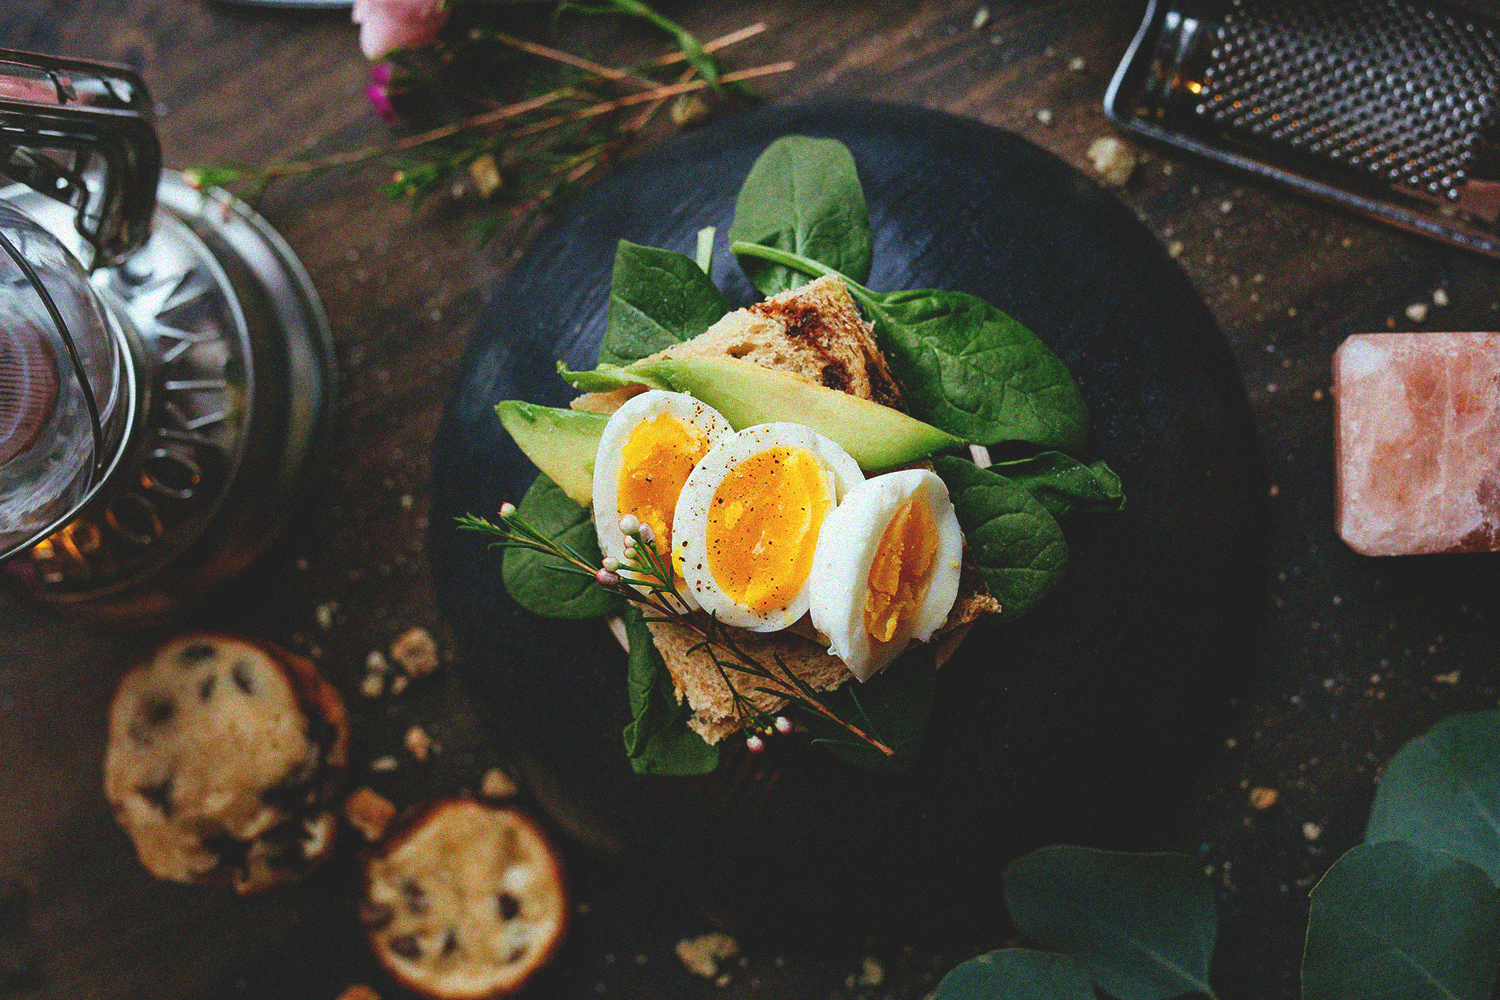 From yolk-intake to Choline, here are 3 reasons why you should be more than happy to welcome eggs back into a nutritiously balanced diet.